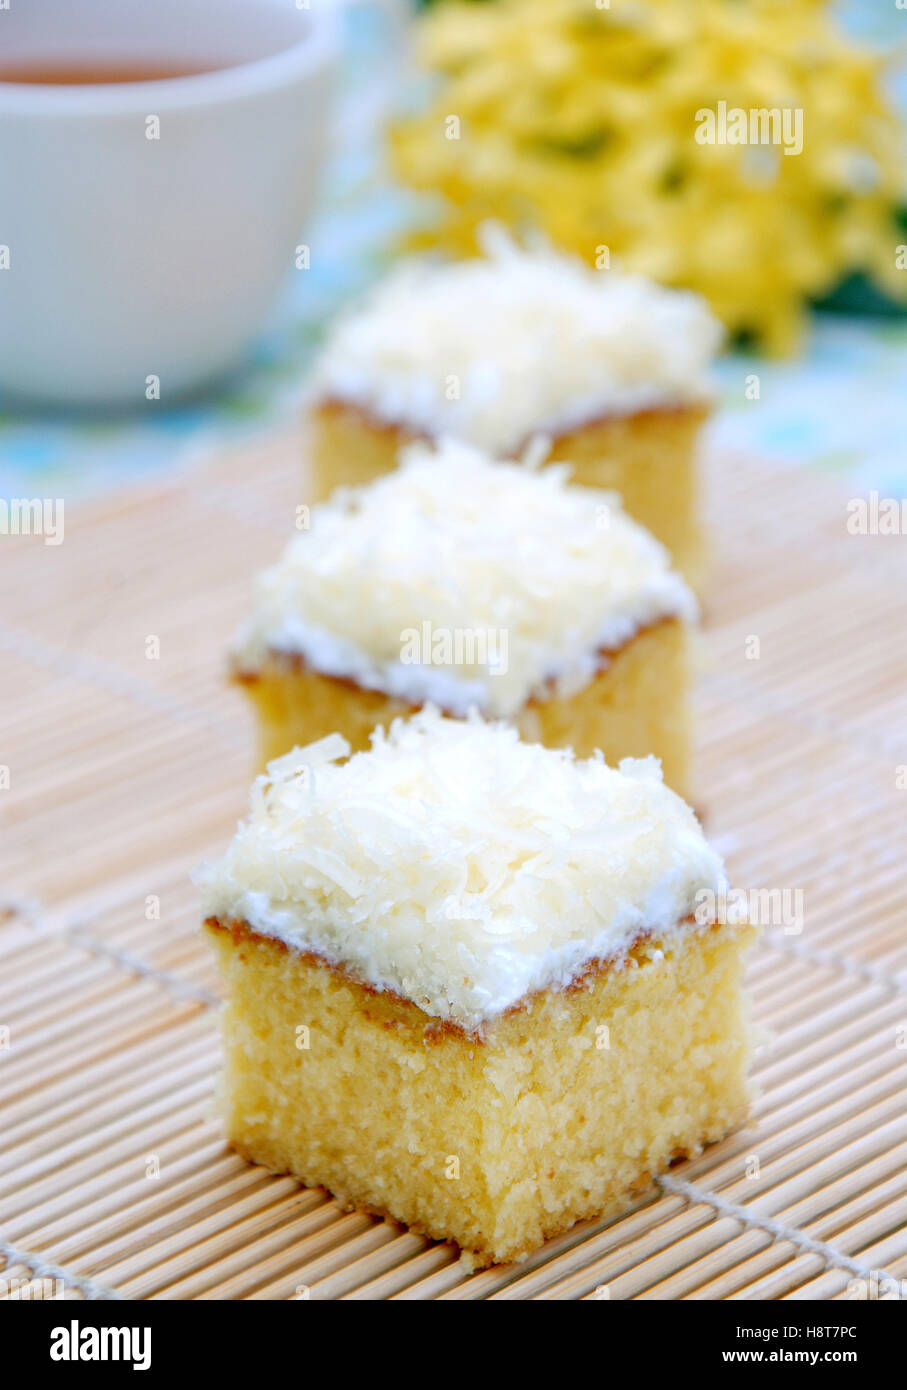 cake with cheese as a toping, with a cup of hot tea as a background Stock Photo